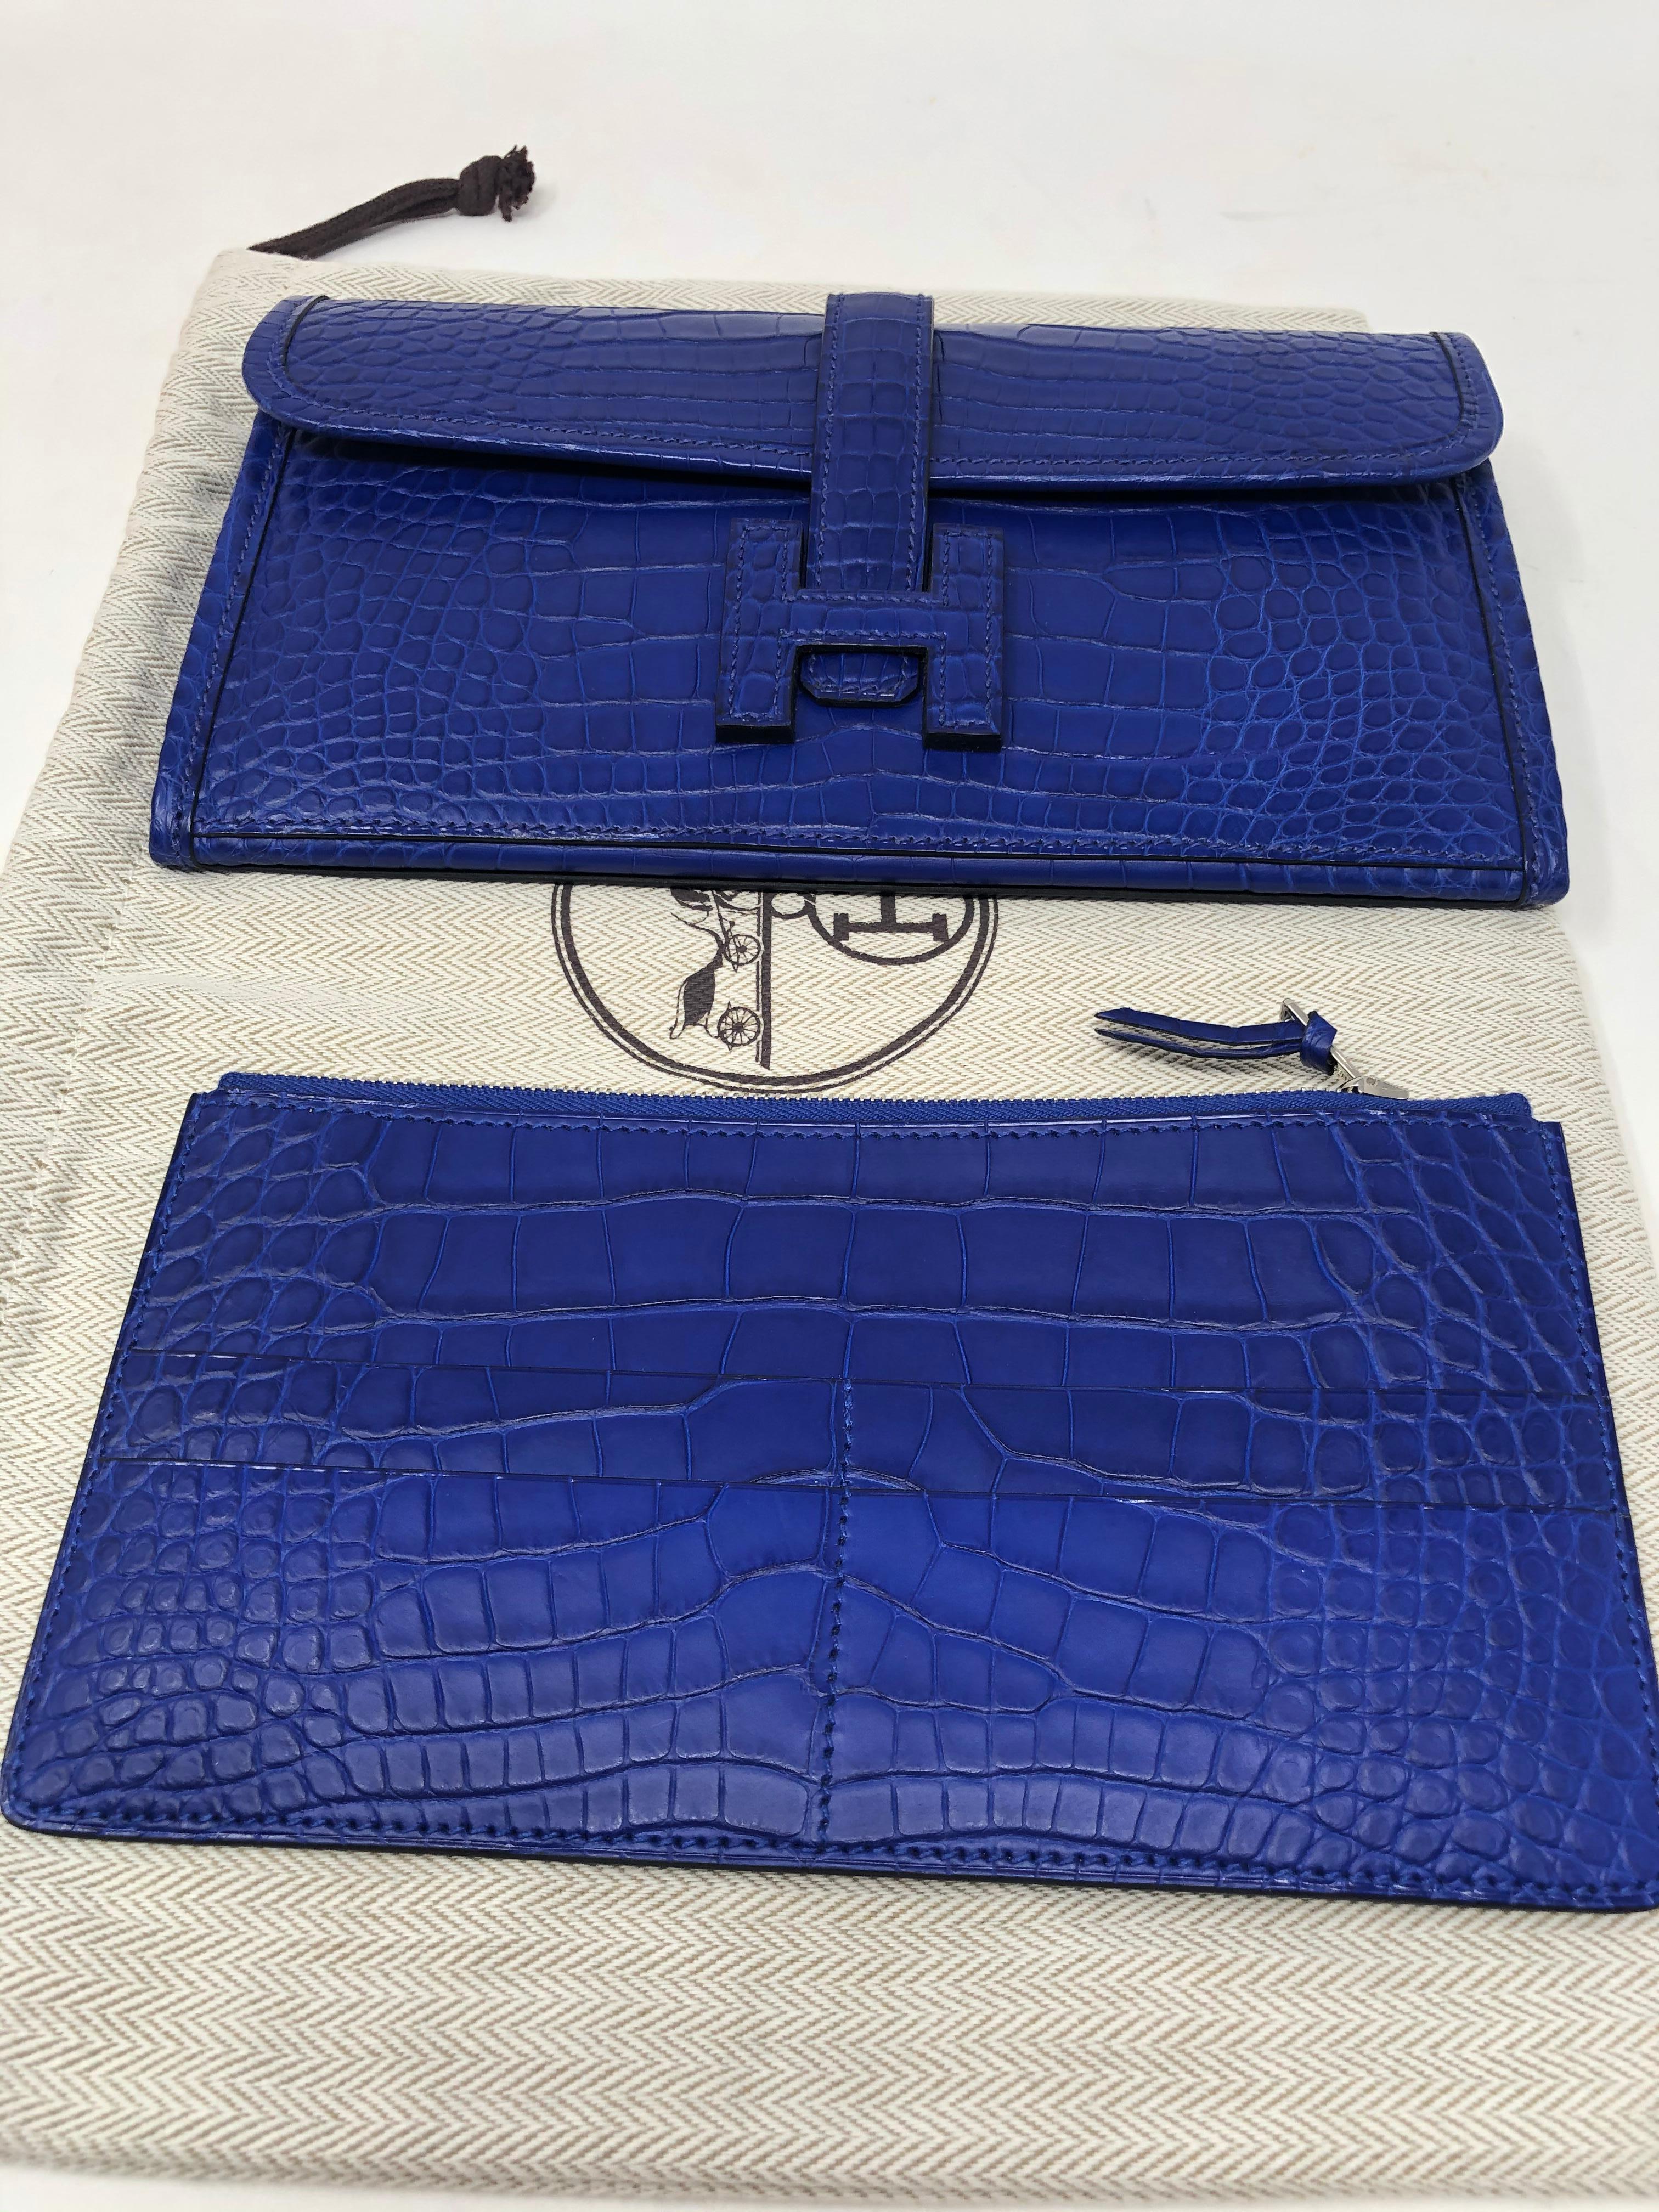 Hermes Crocodile Bleu Electrique Jige Duo Wallet. Hermes long wallet in matte Alligator. Can be worn as an evening or day clutch. Includes insert for holding cards, etc. Never used. Stayed in the box. Purchased at Hermes $20,200. Includes dust cover